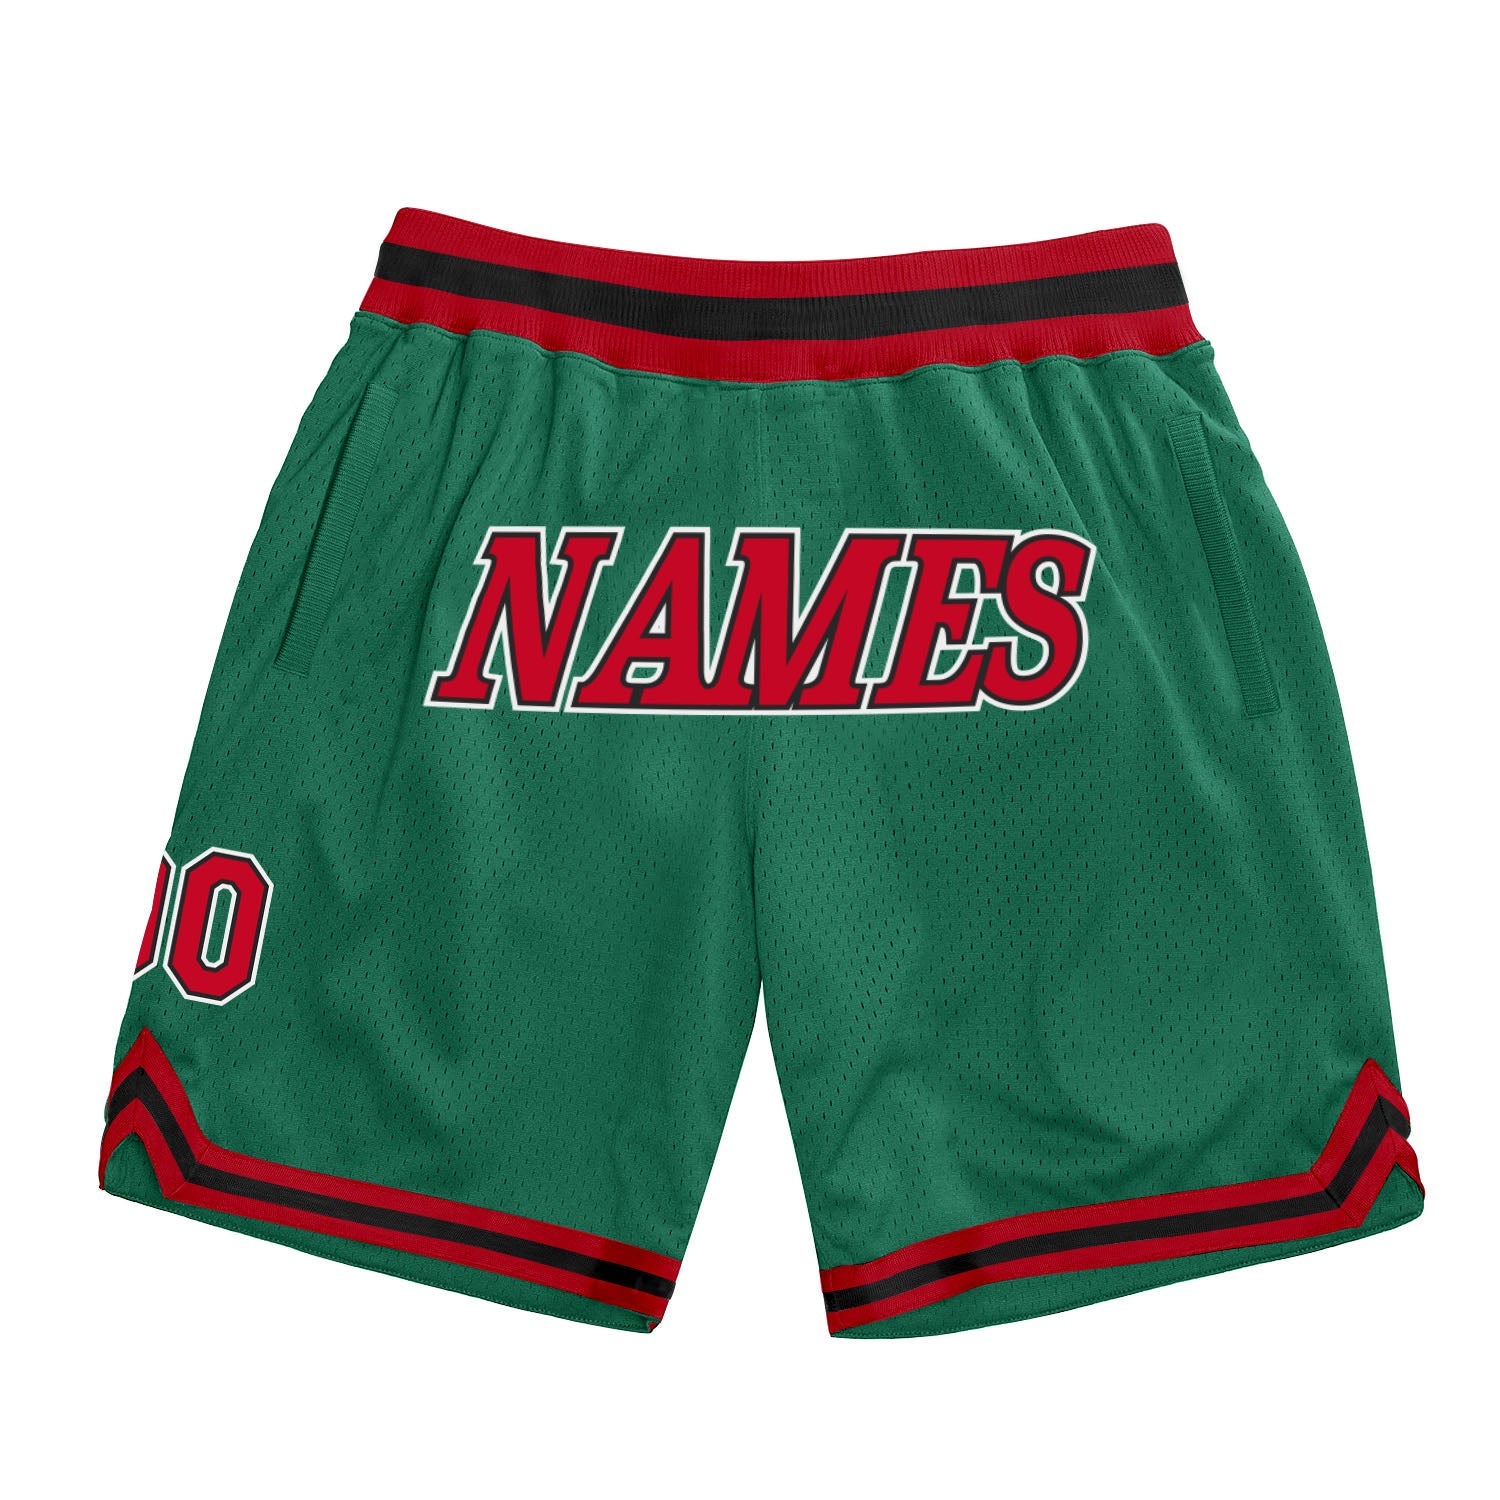 Custom Kelly Green Red-Black Authentic Throwback Basketball Shorts